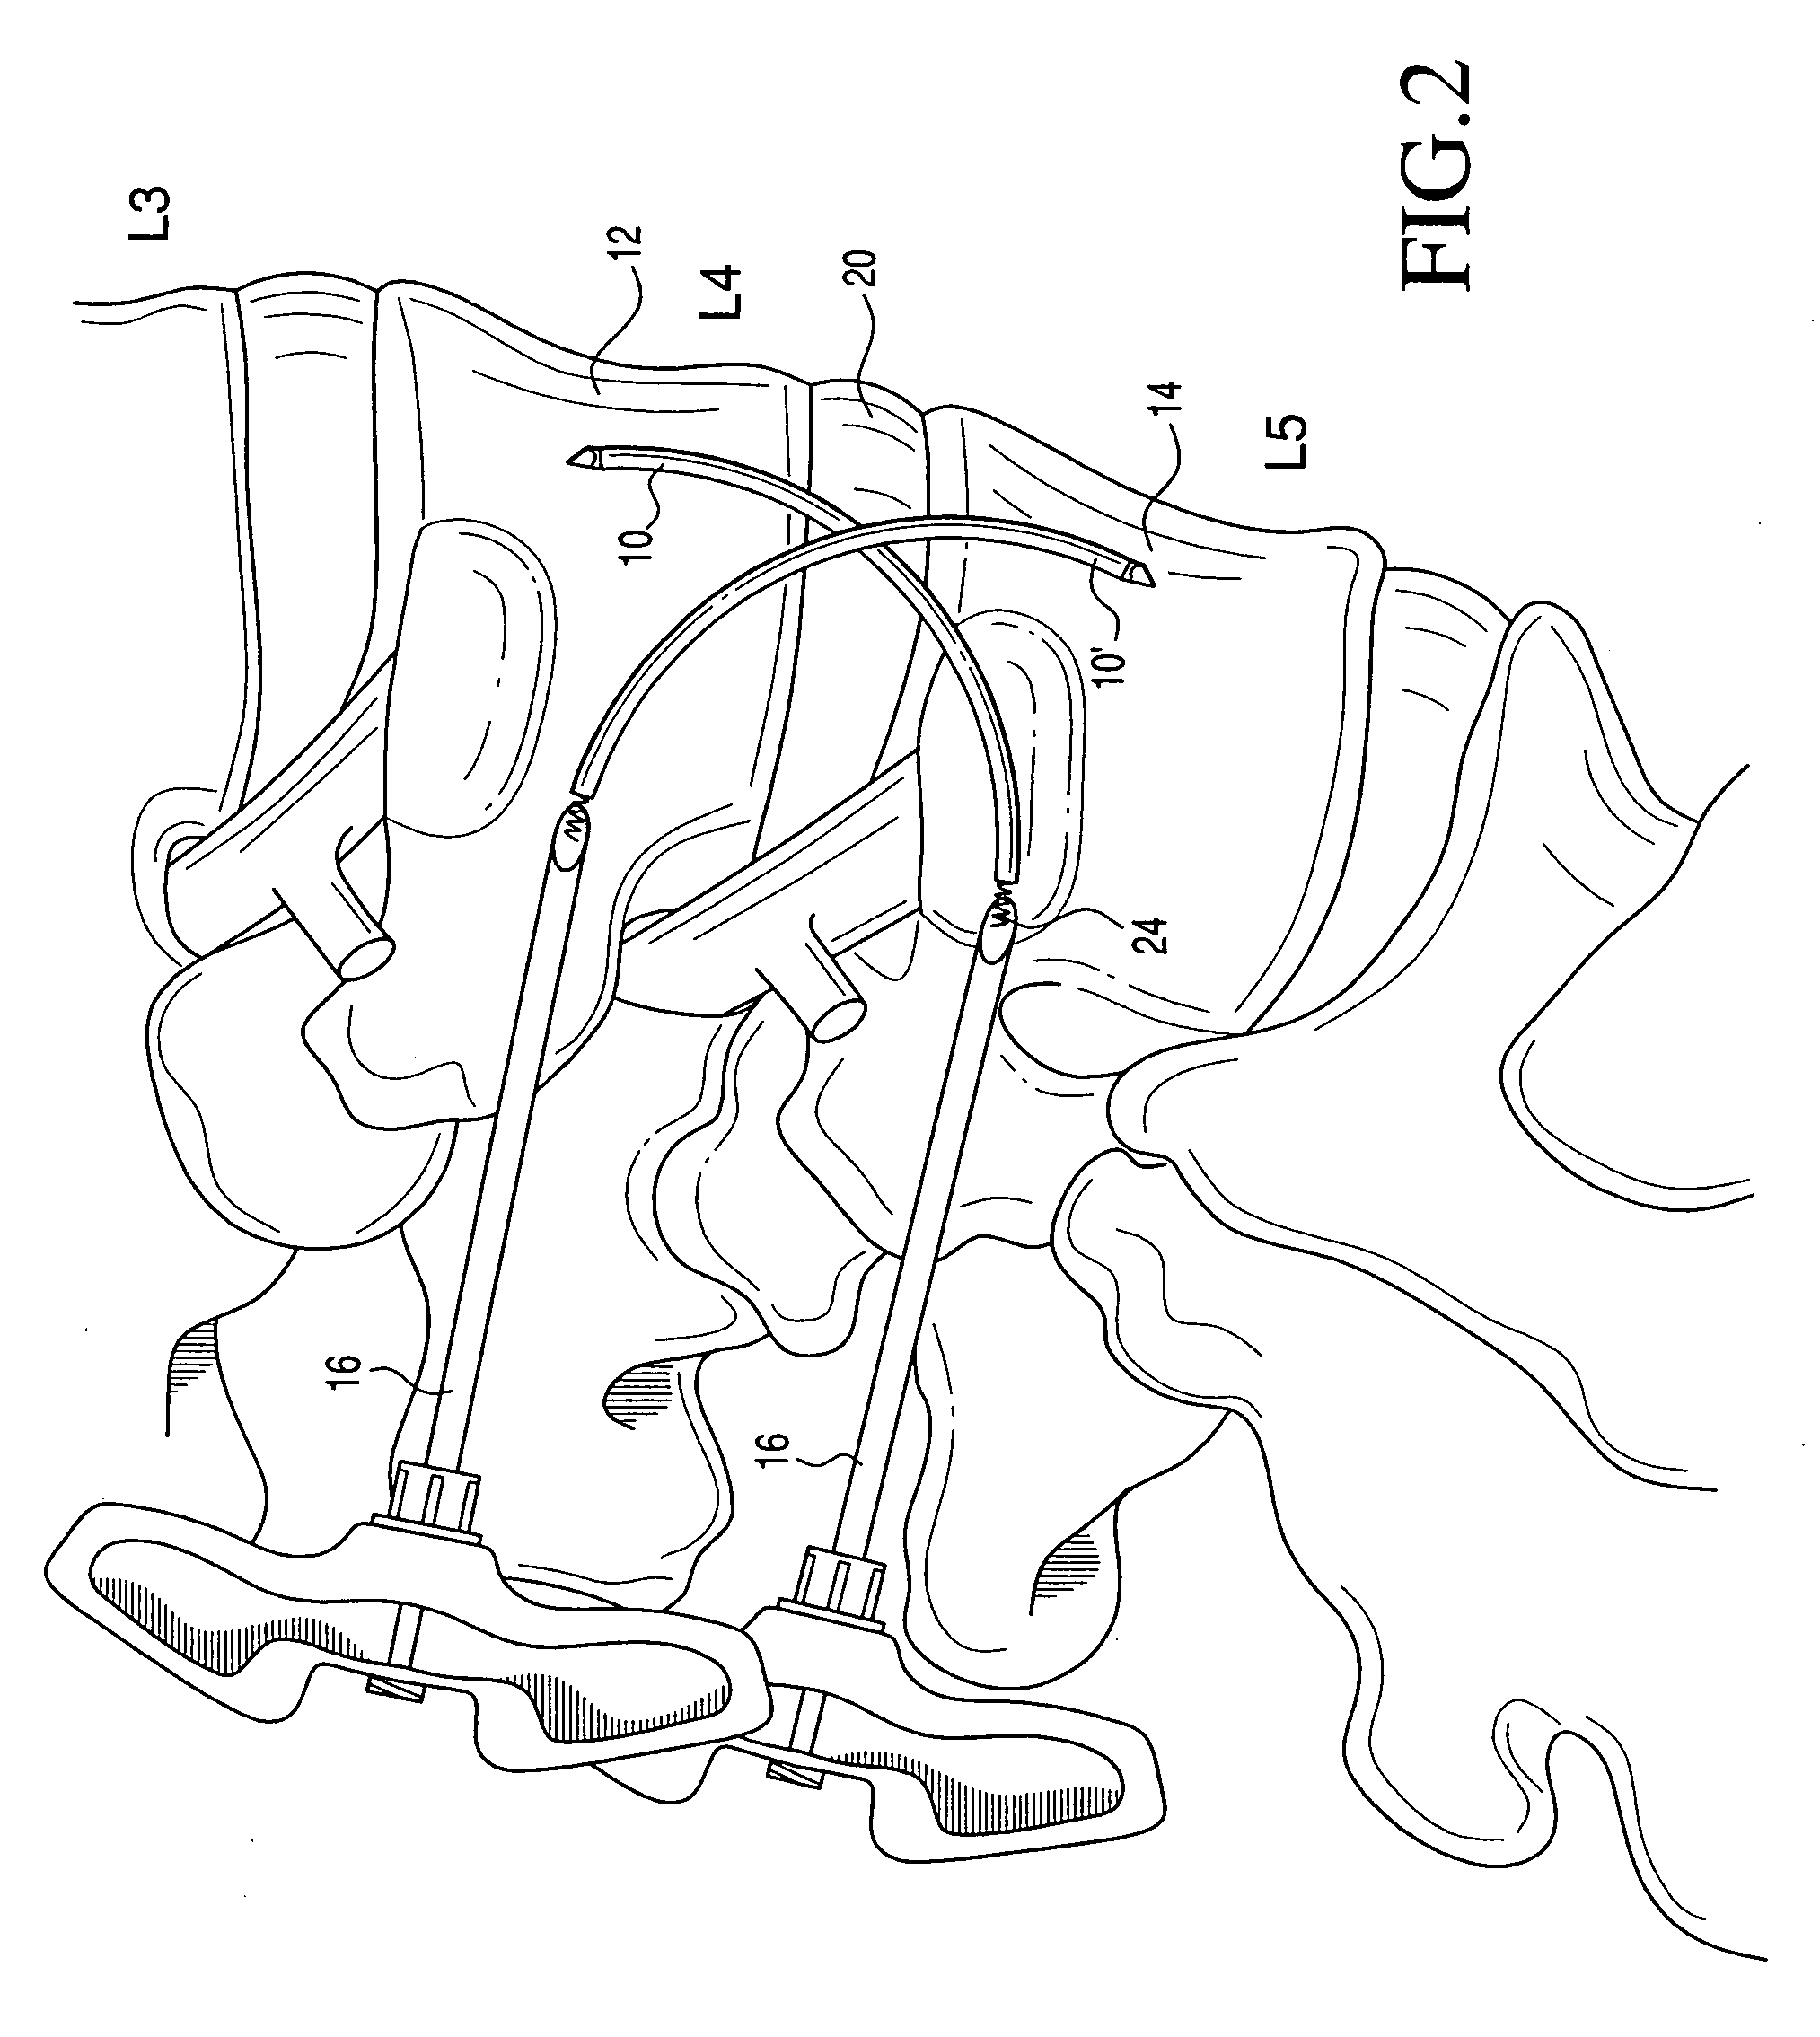 Percutaneous spinal stabilization device and method